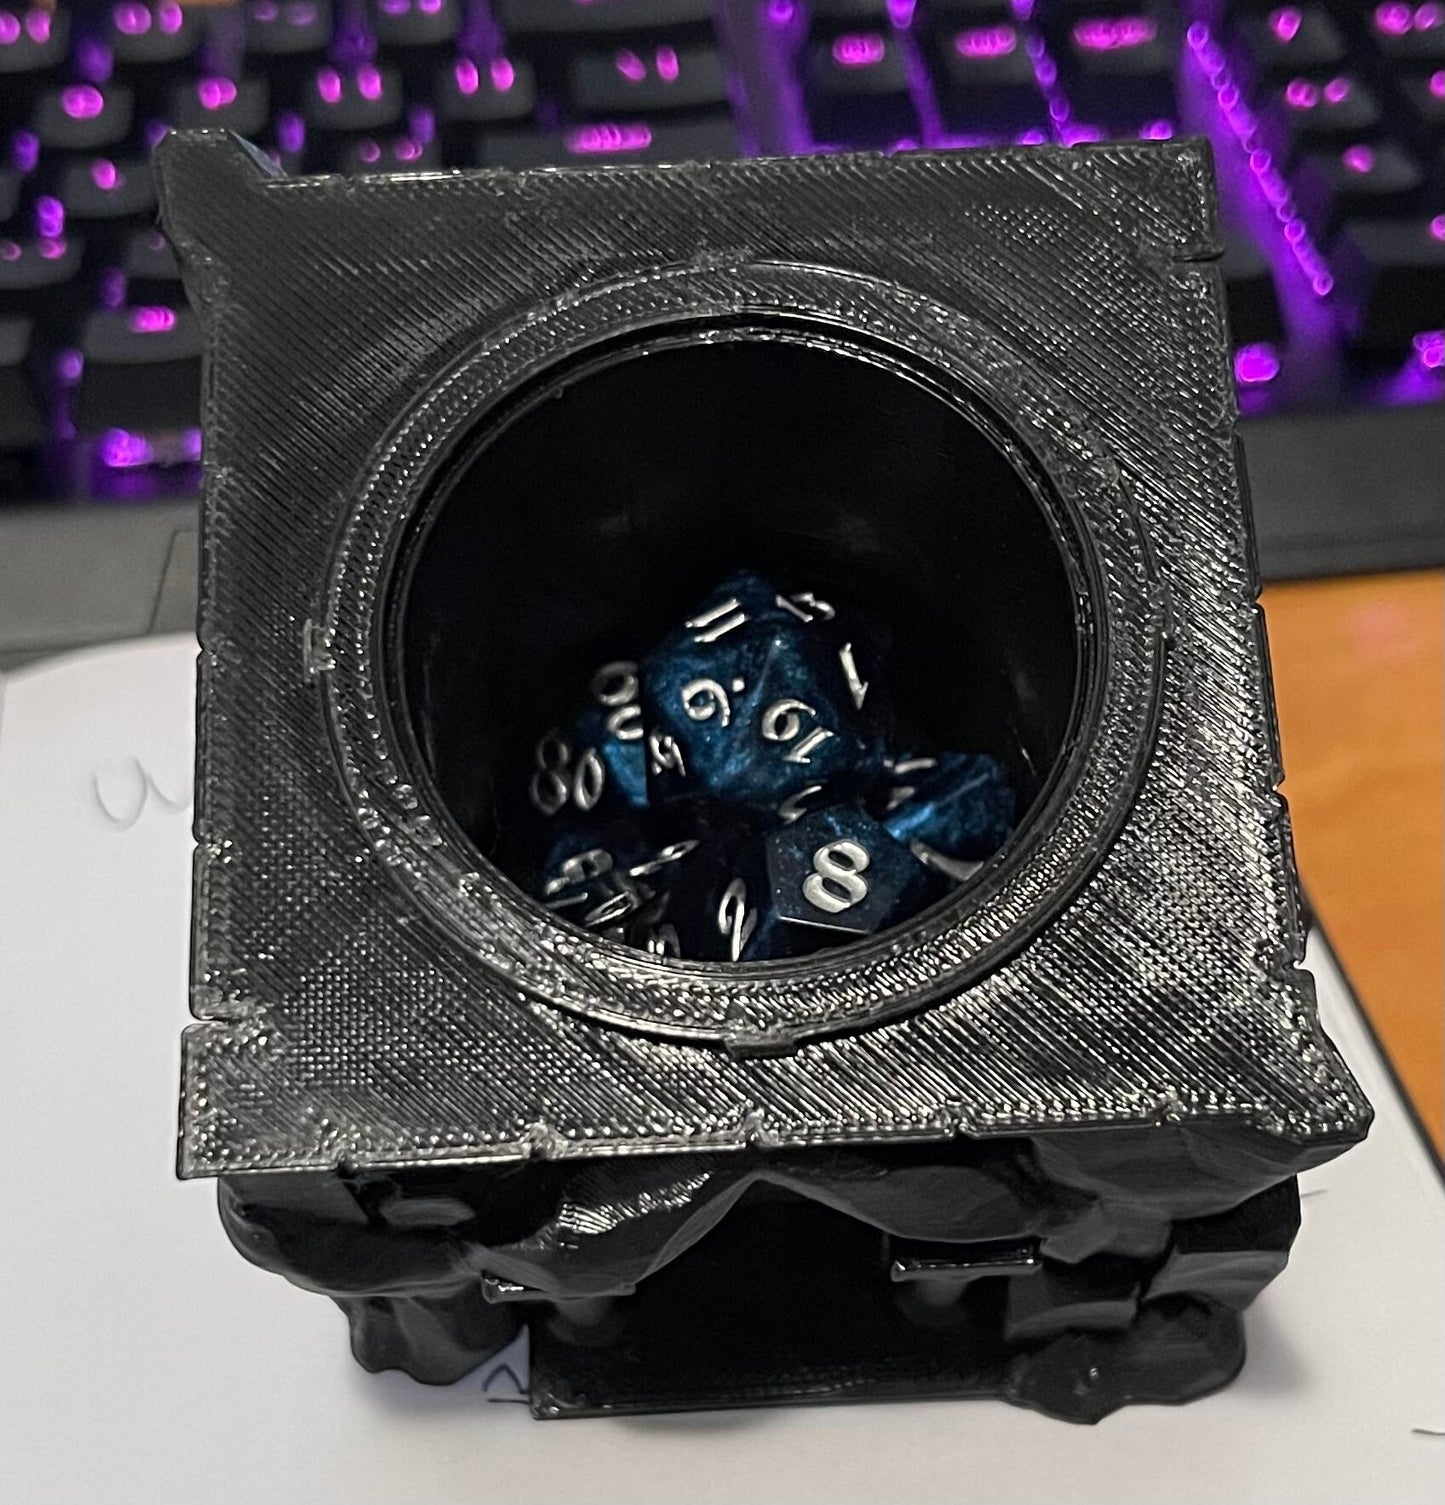 Frost Giant Dice Tower and Vault - Mythic Roll - Tabletop RPGs / D&D / Pathfinder